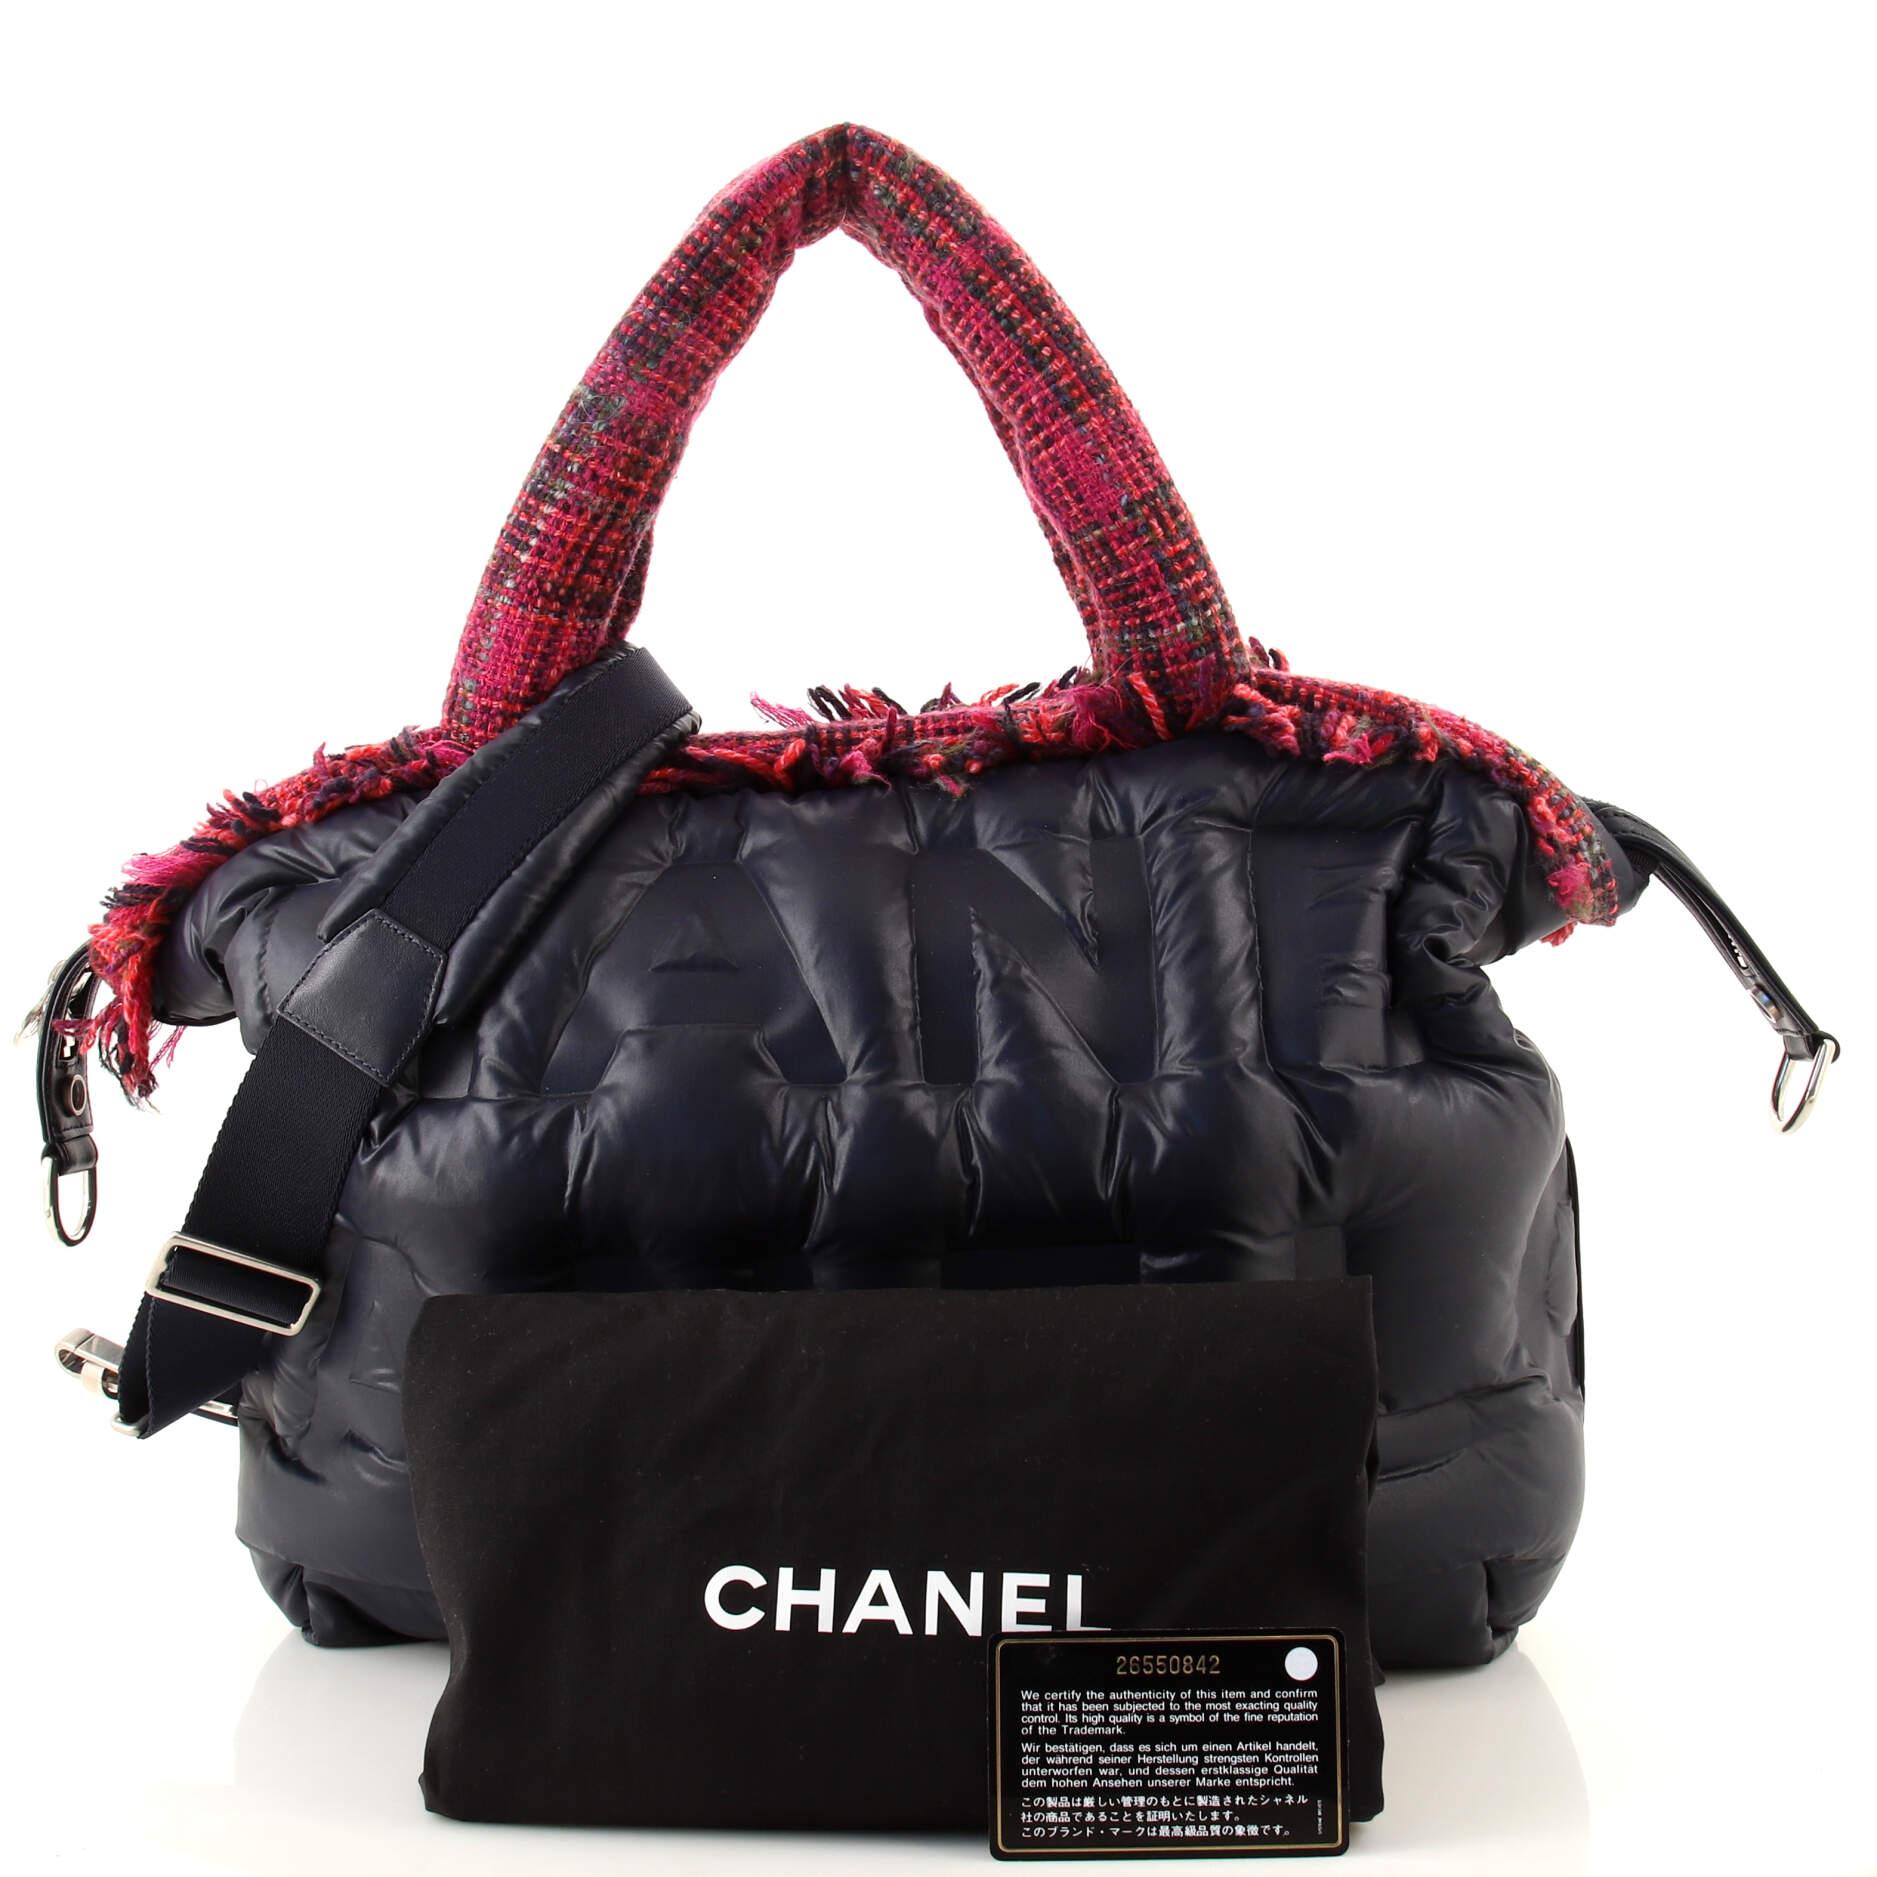 Chanel Doudoune - 2 For Sale on 1stDibs | chanel puffer backpack, chanel  doudoune backpack, doudoune chanel